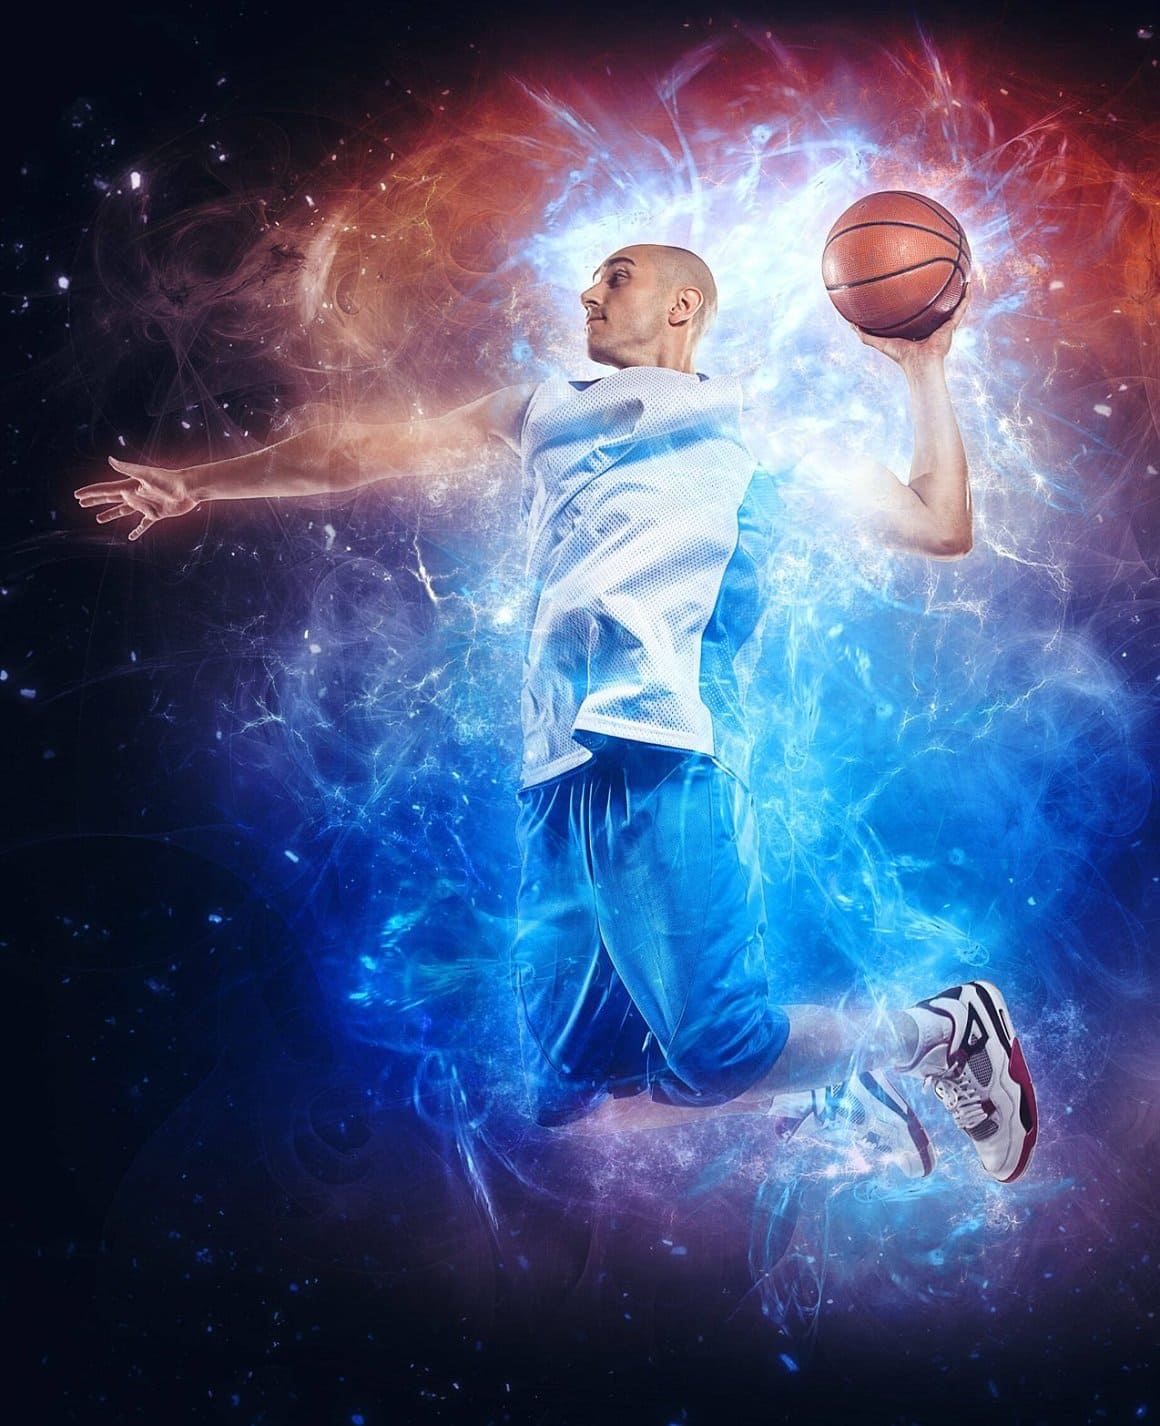 A basketball player is ready for a decisive shot against the background of electric current.